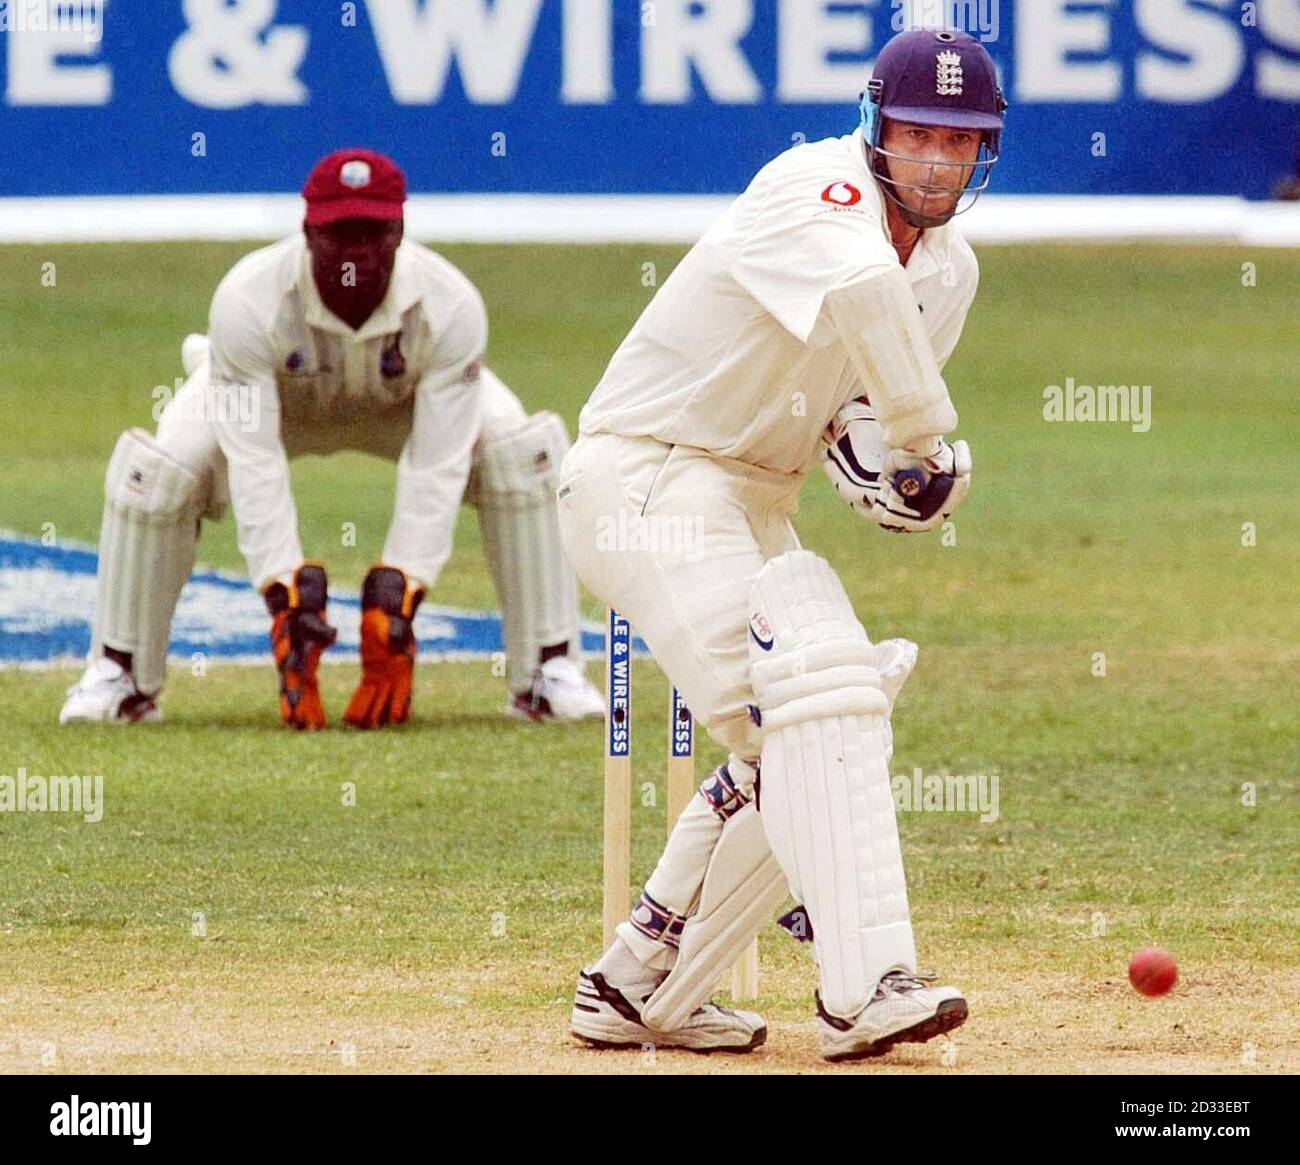 England batsman Graham Thorpe in action during the third day of the First Test match against the West Indies at Sabina Park, Kingston, Jamaica. Stock Photo